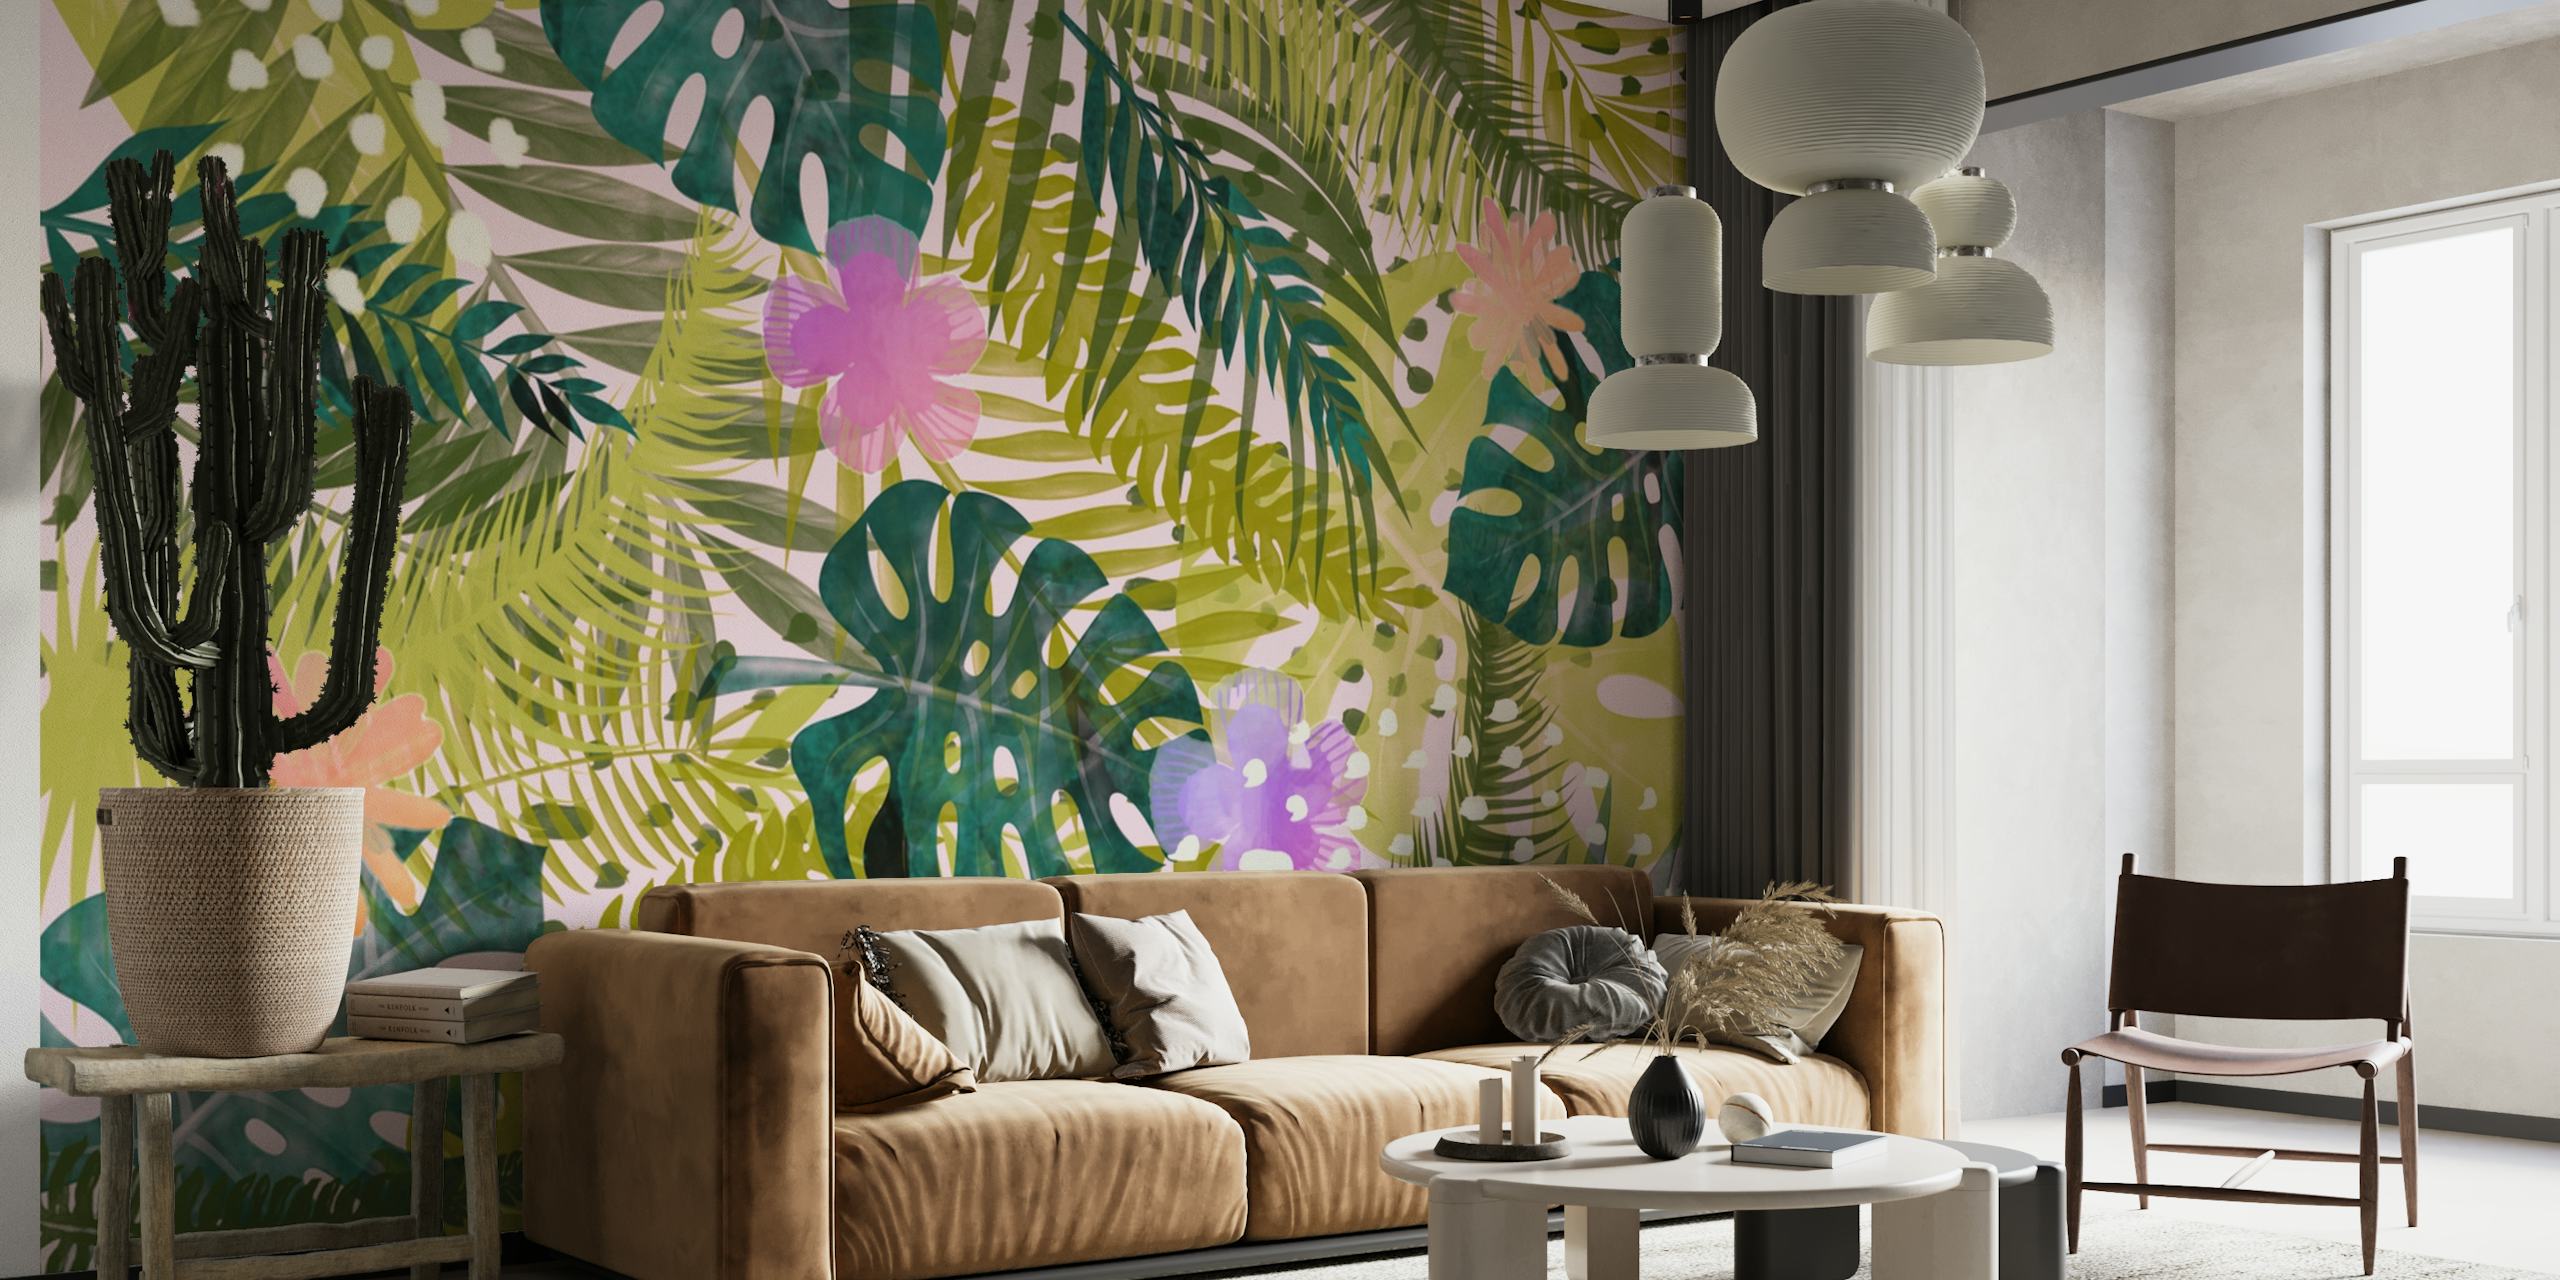 Jungle wall art mural with vivid green foliage and pink flowers